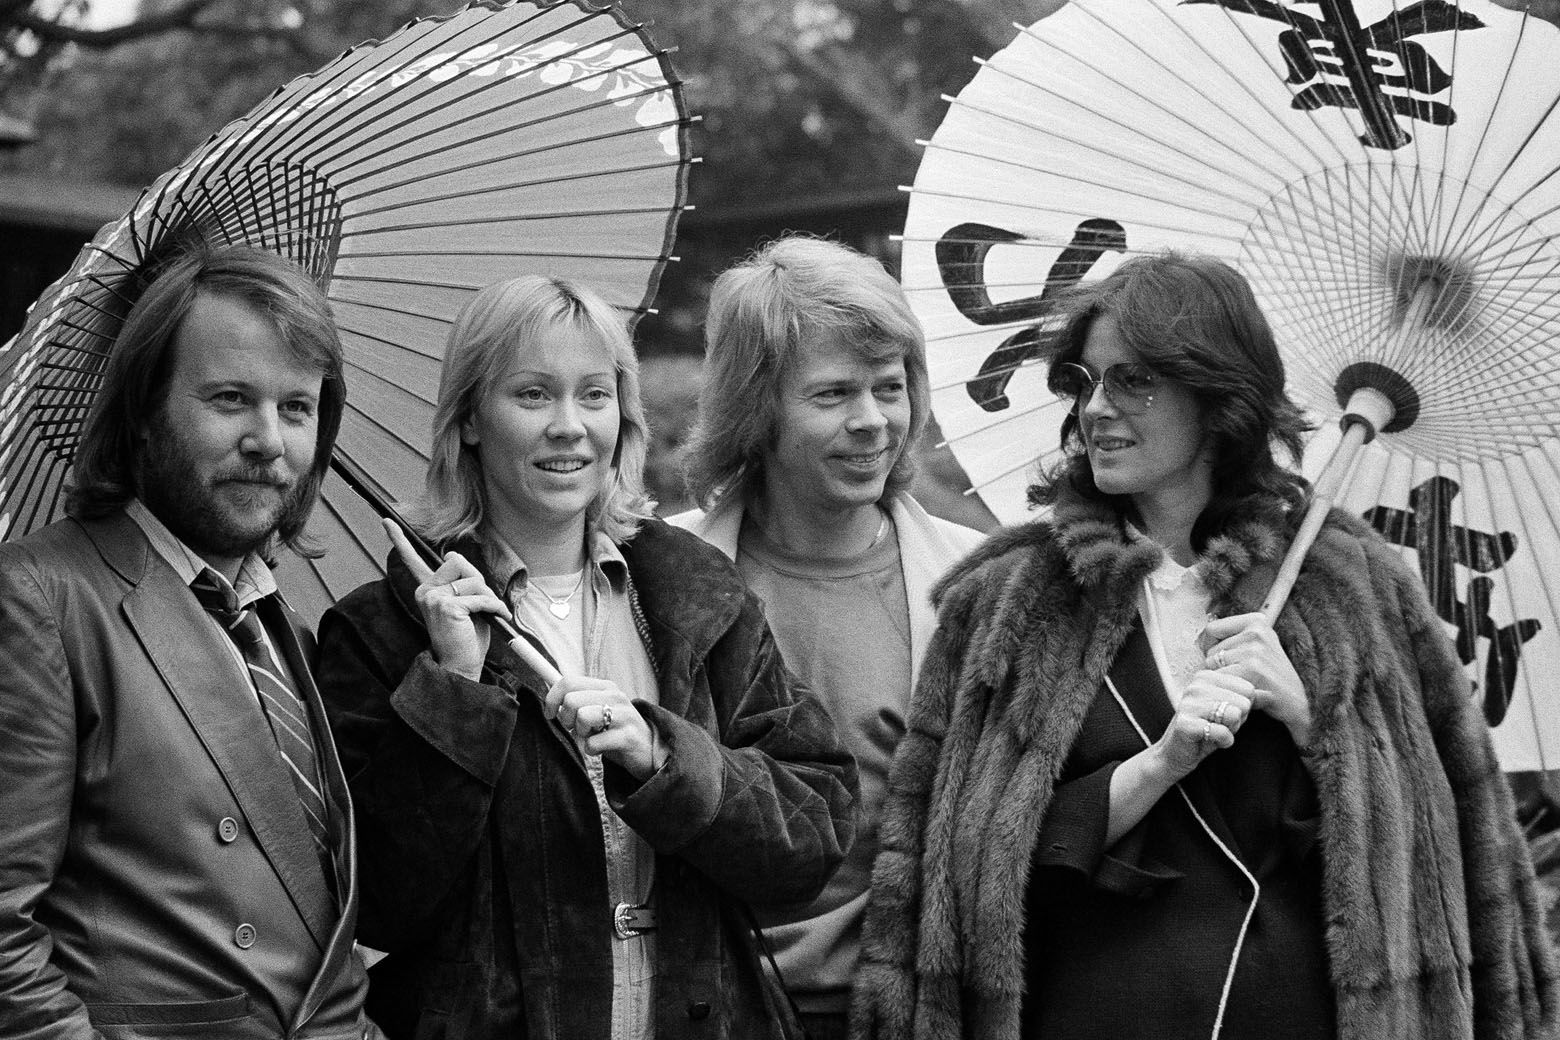 FILE - In this March 14, 1980, file photo, the four members of the Swedish pop group ABBA hold Japanese oil paper parasols in a light rain in the Japanese garden of their hotel in Tokyo. From left: Benny Andersson, Agnetha Faltskog, Bjorn Ulvaeus and Anni-Frid Lyngstad. The members of ABBA are reuniting for a â€œnew digital experienceâ€ next year. The iconic Swedish pop band made the announcement Wednesday, Oct. 26, 2016, but didnâ€&#x2122;t offer much detail. (AP Photo/Tsugufumi Matsumoto)